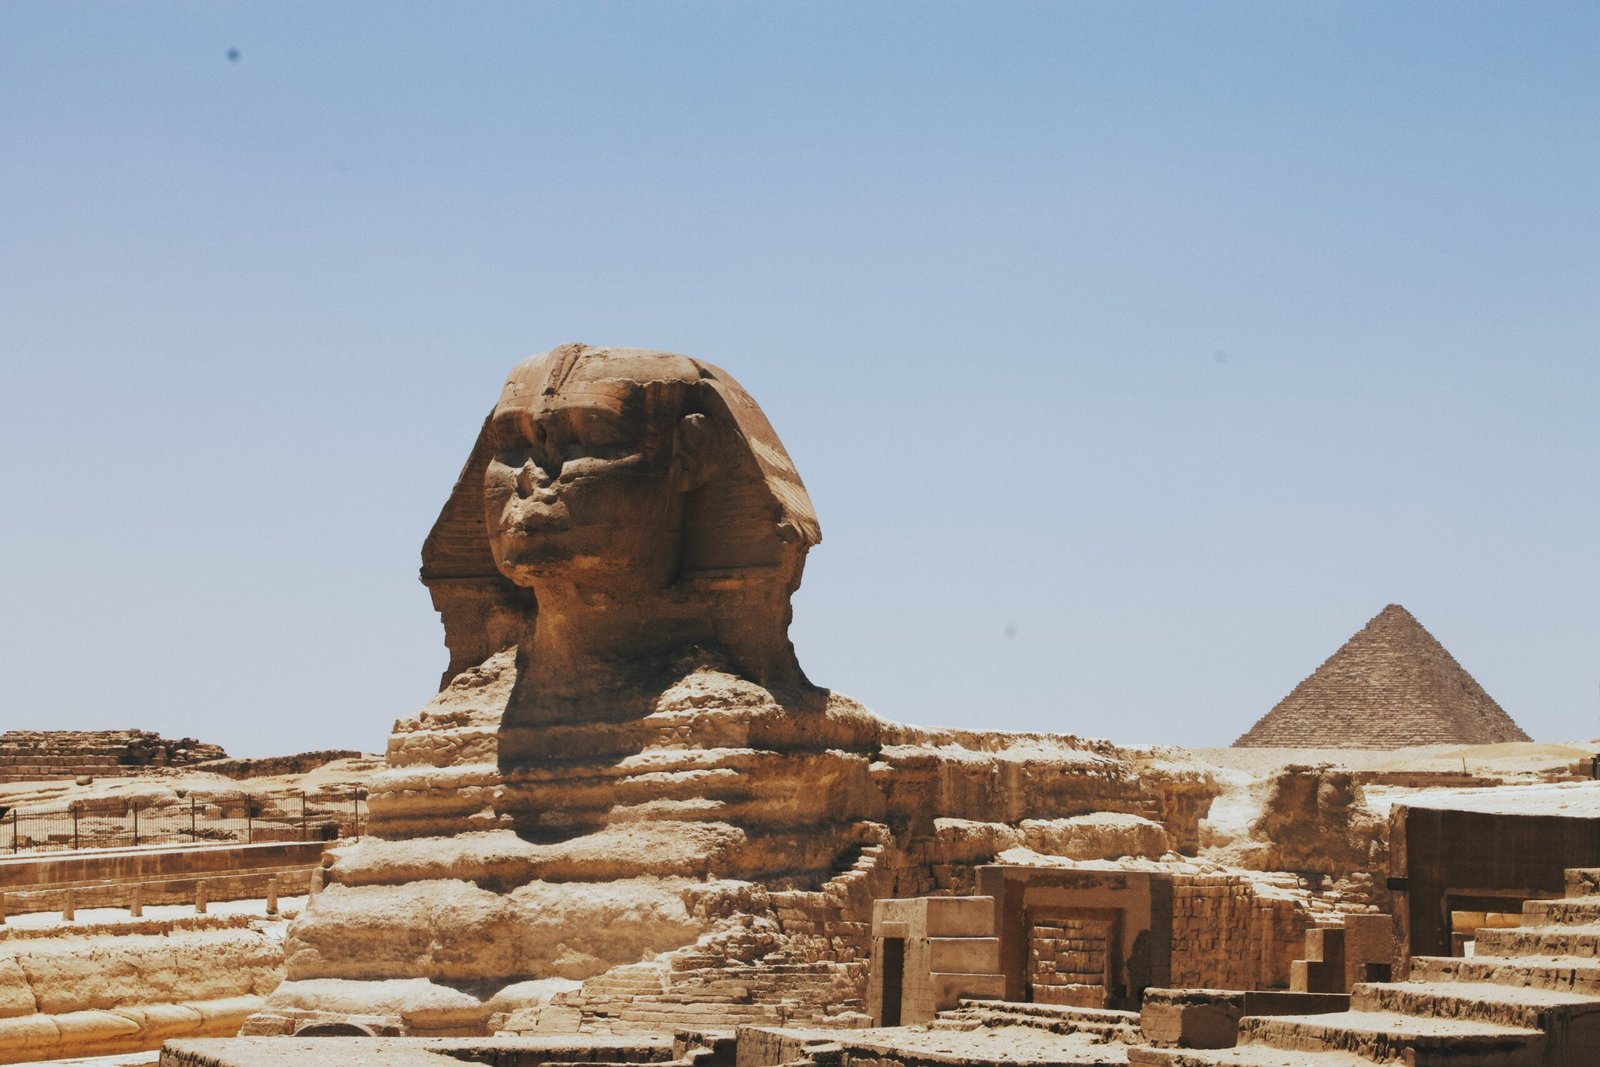 A photograph of the sphinx